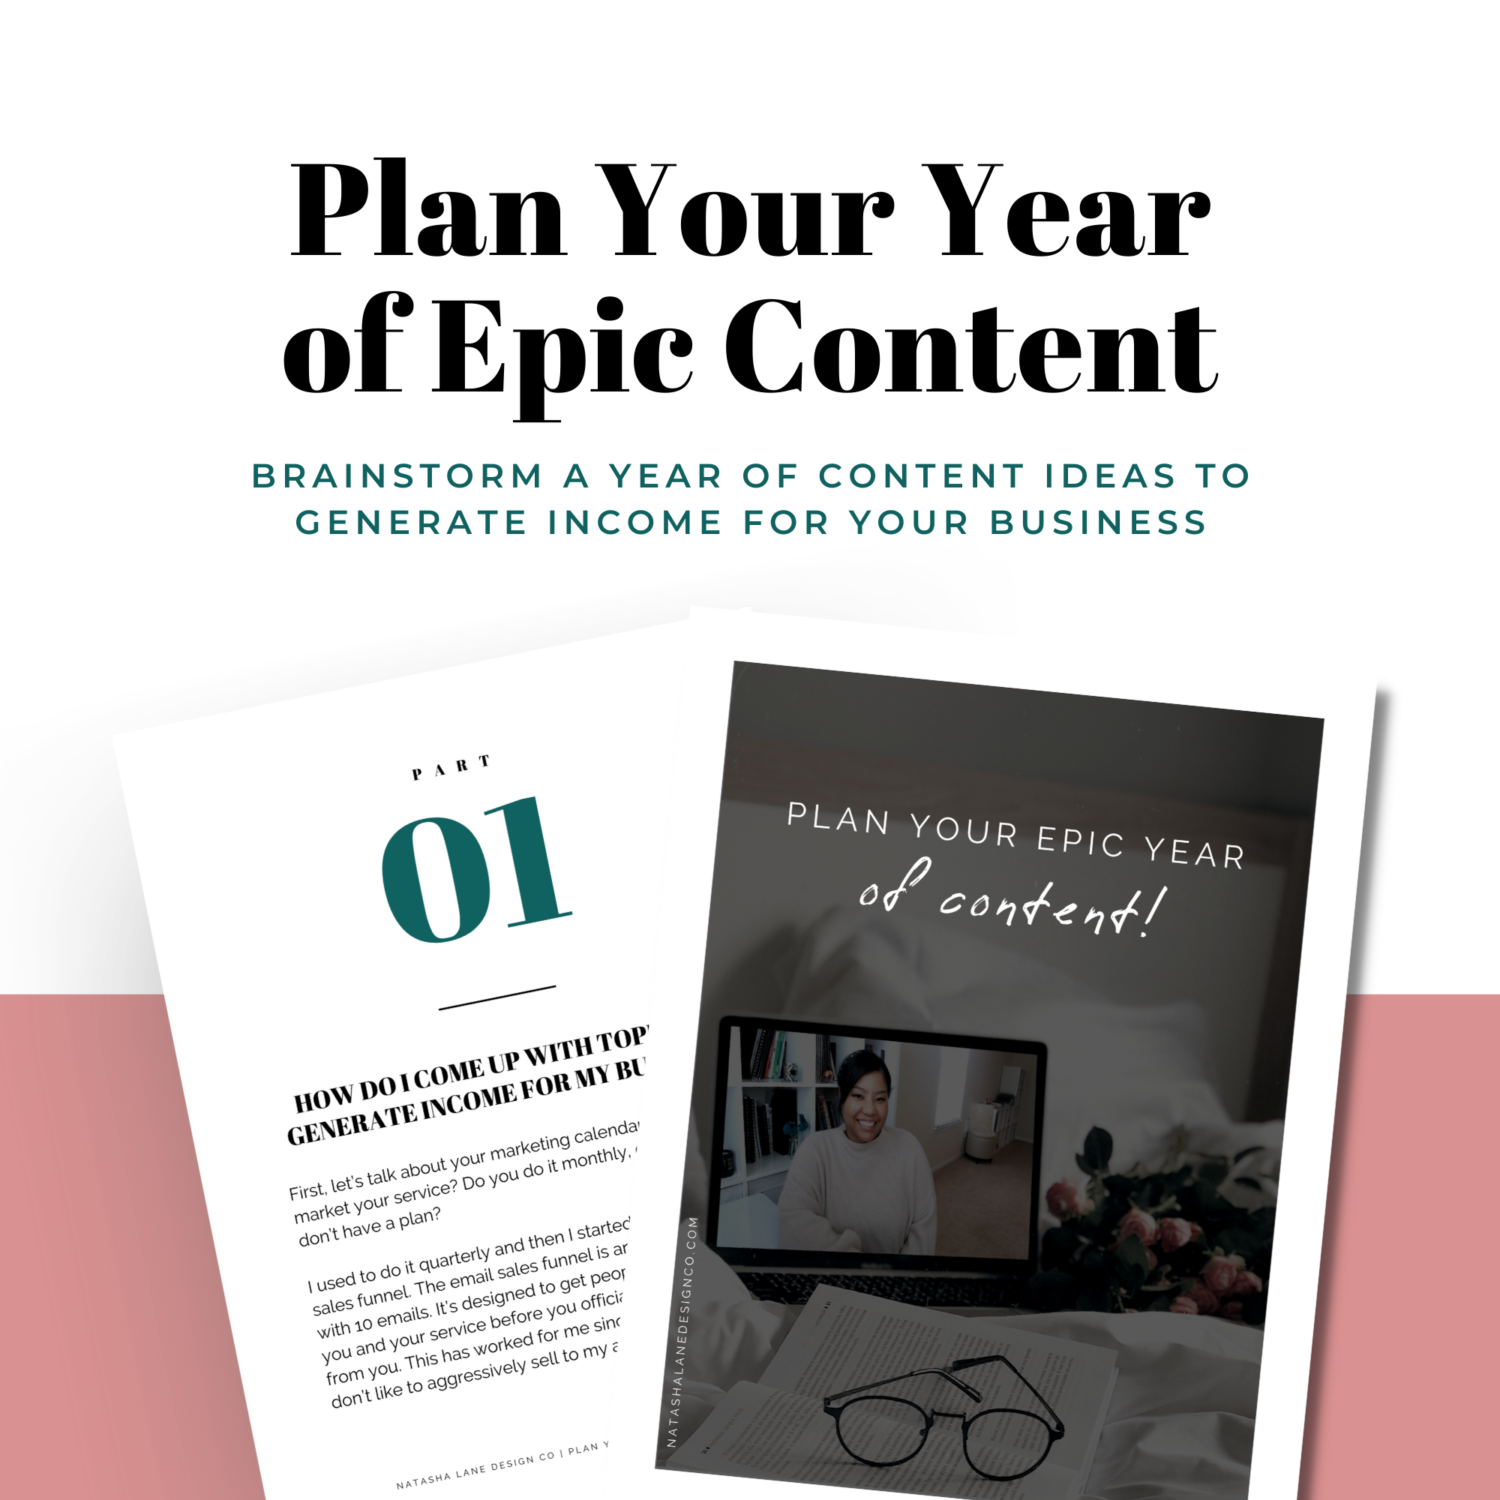 Plan Your Year of Epic Content